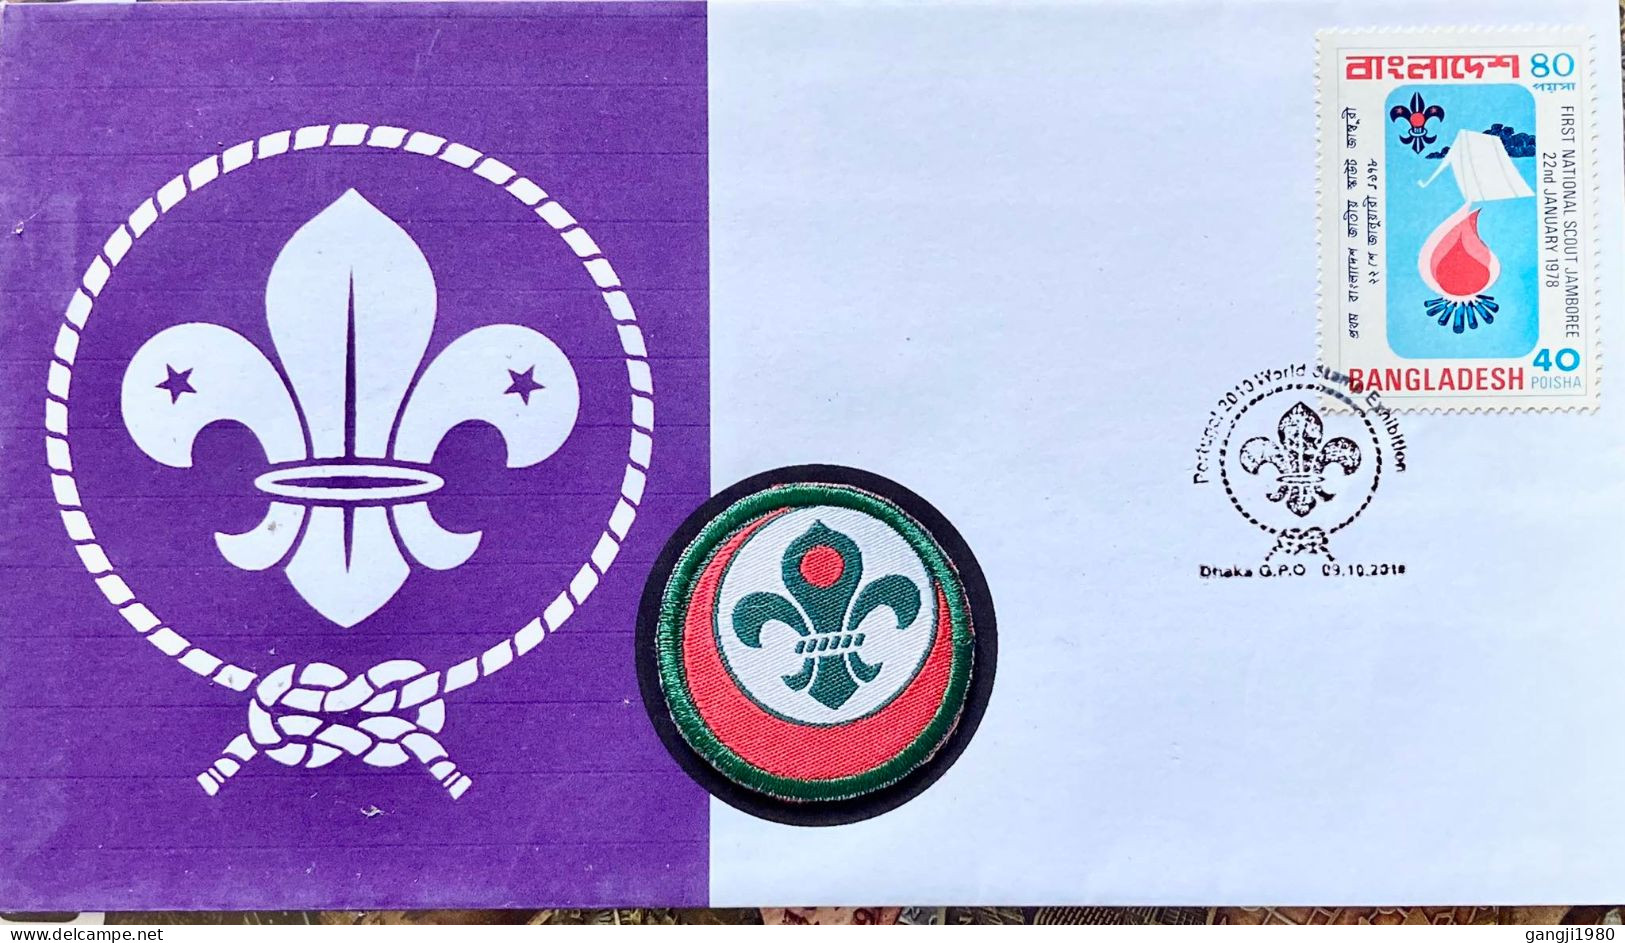 BANGLADESH 2010, PRIVATE COVER SCOUT, HANDMADE CLOTH BADGE, WORLD STAMP EXHIBITION, SCOUT JAMBOREE 1978 STAMP - Bangladesch